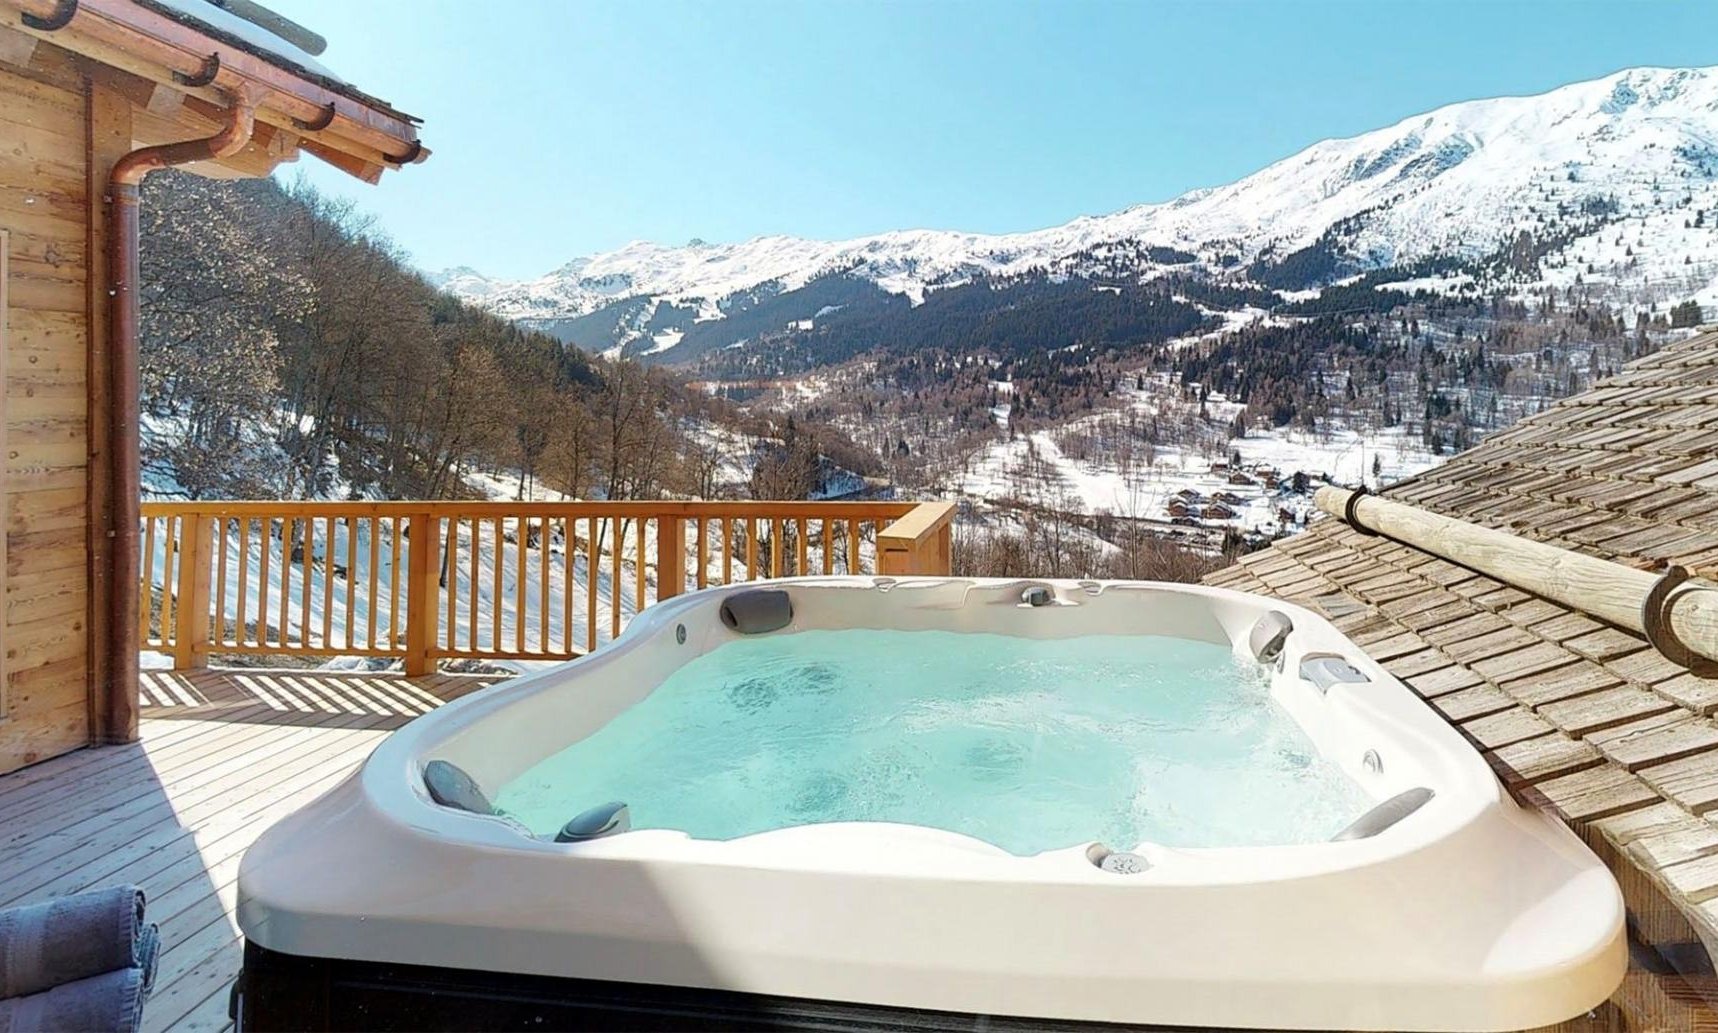 The Hot Tub on the terrace with beautiful views at Chalet Infusion Meribel Village